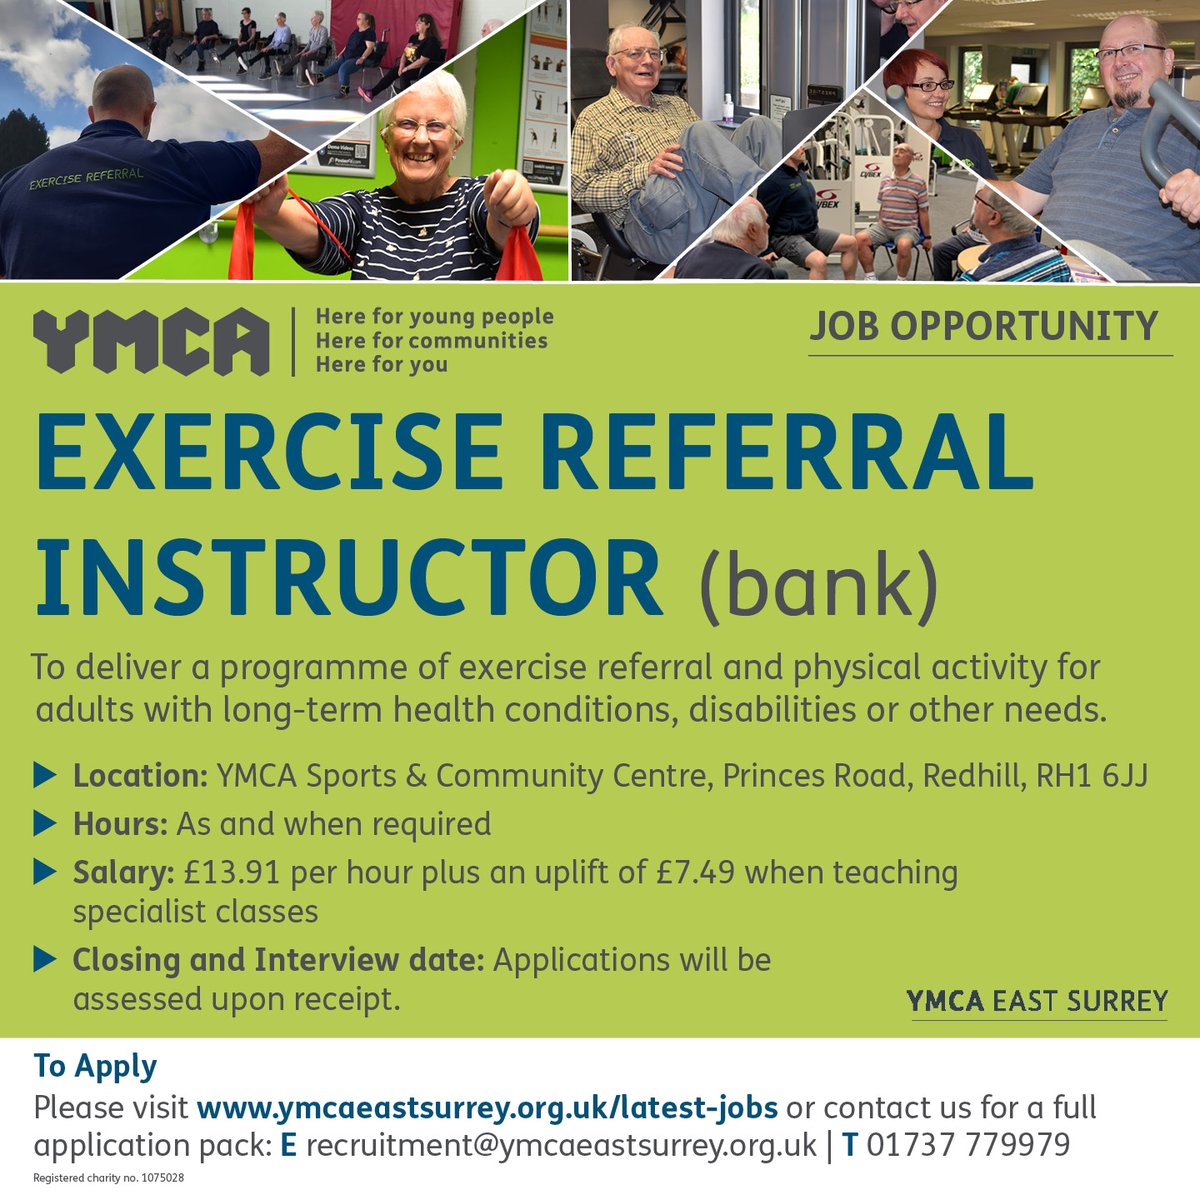 Exercise Referral Instructor needed in Redhill.
Interested?
Find out more at:
ymcaeastsurrey.org.uk/jobs/exercise-…
#fitnessjobs #fitness #surreyjobs #charityjobs #exercisereferral @YMCAEng_Wales